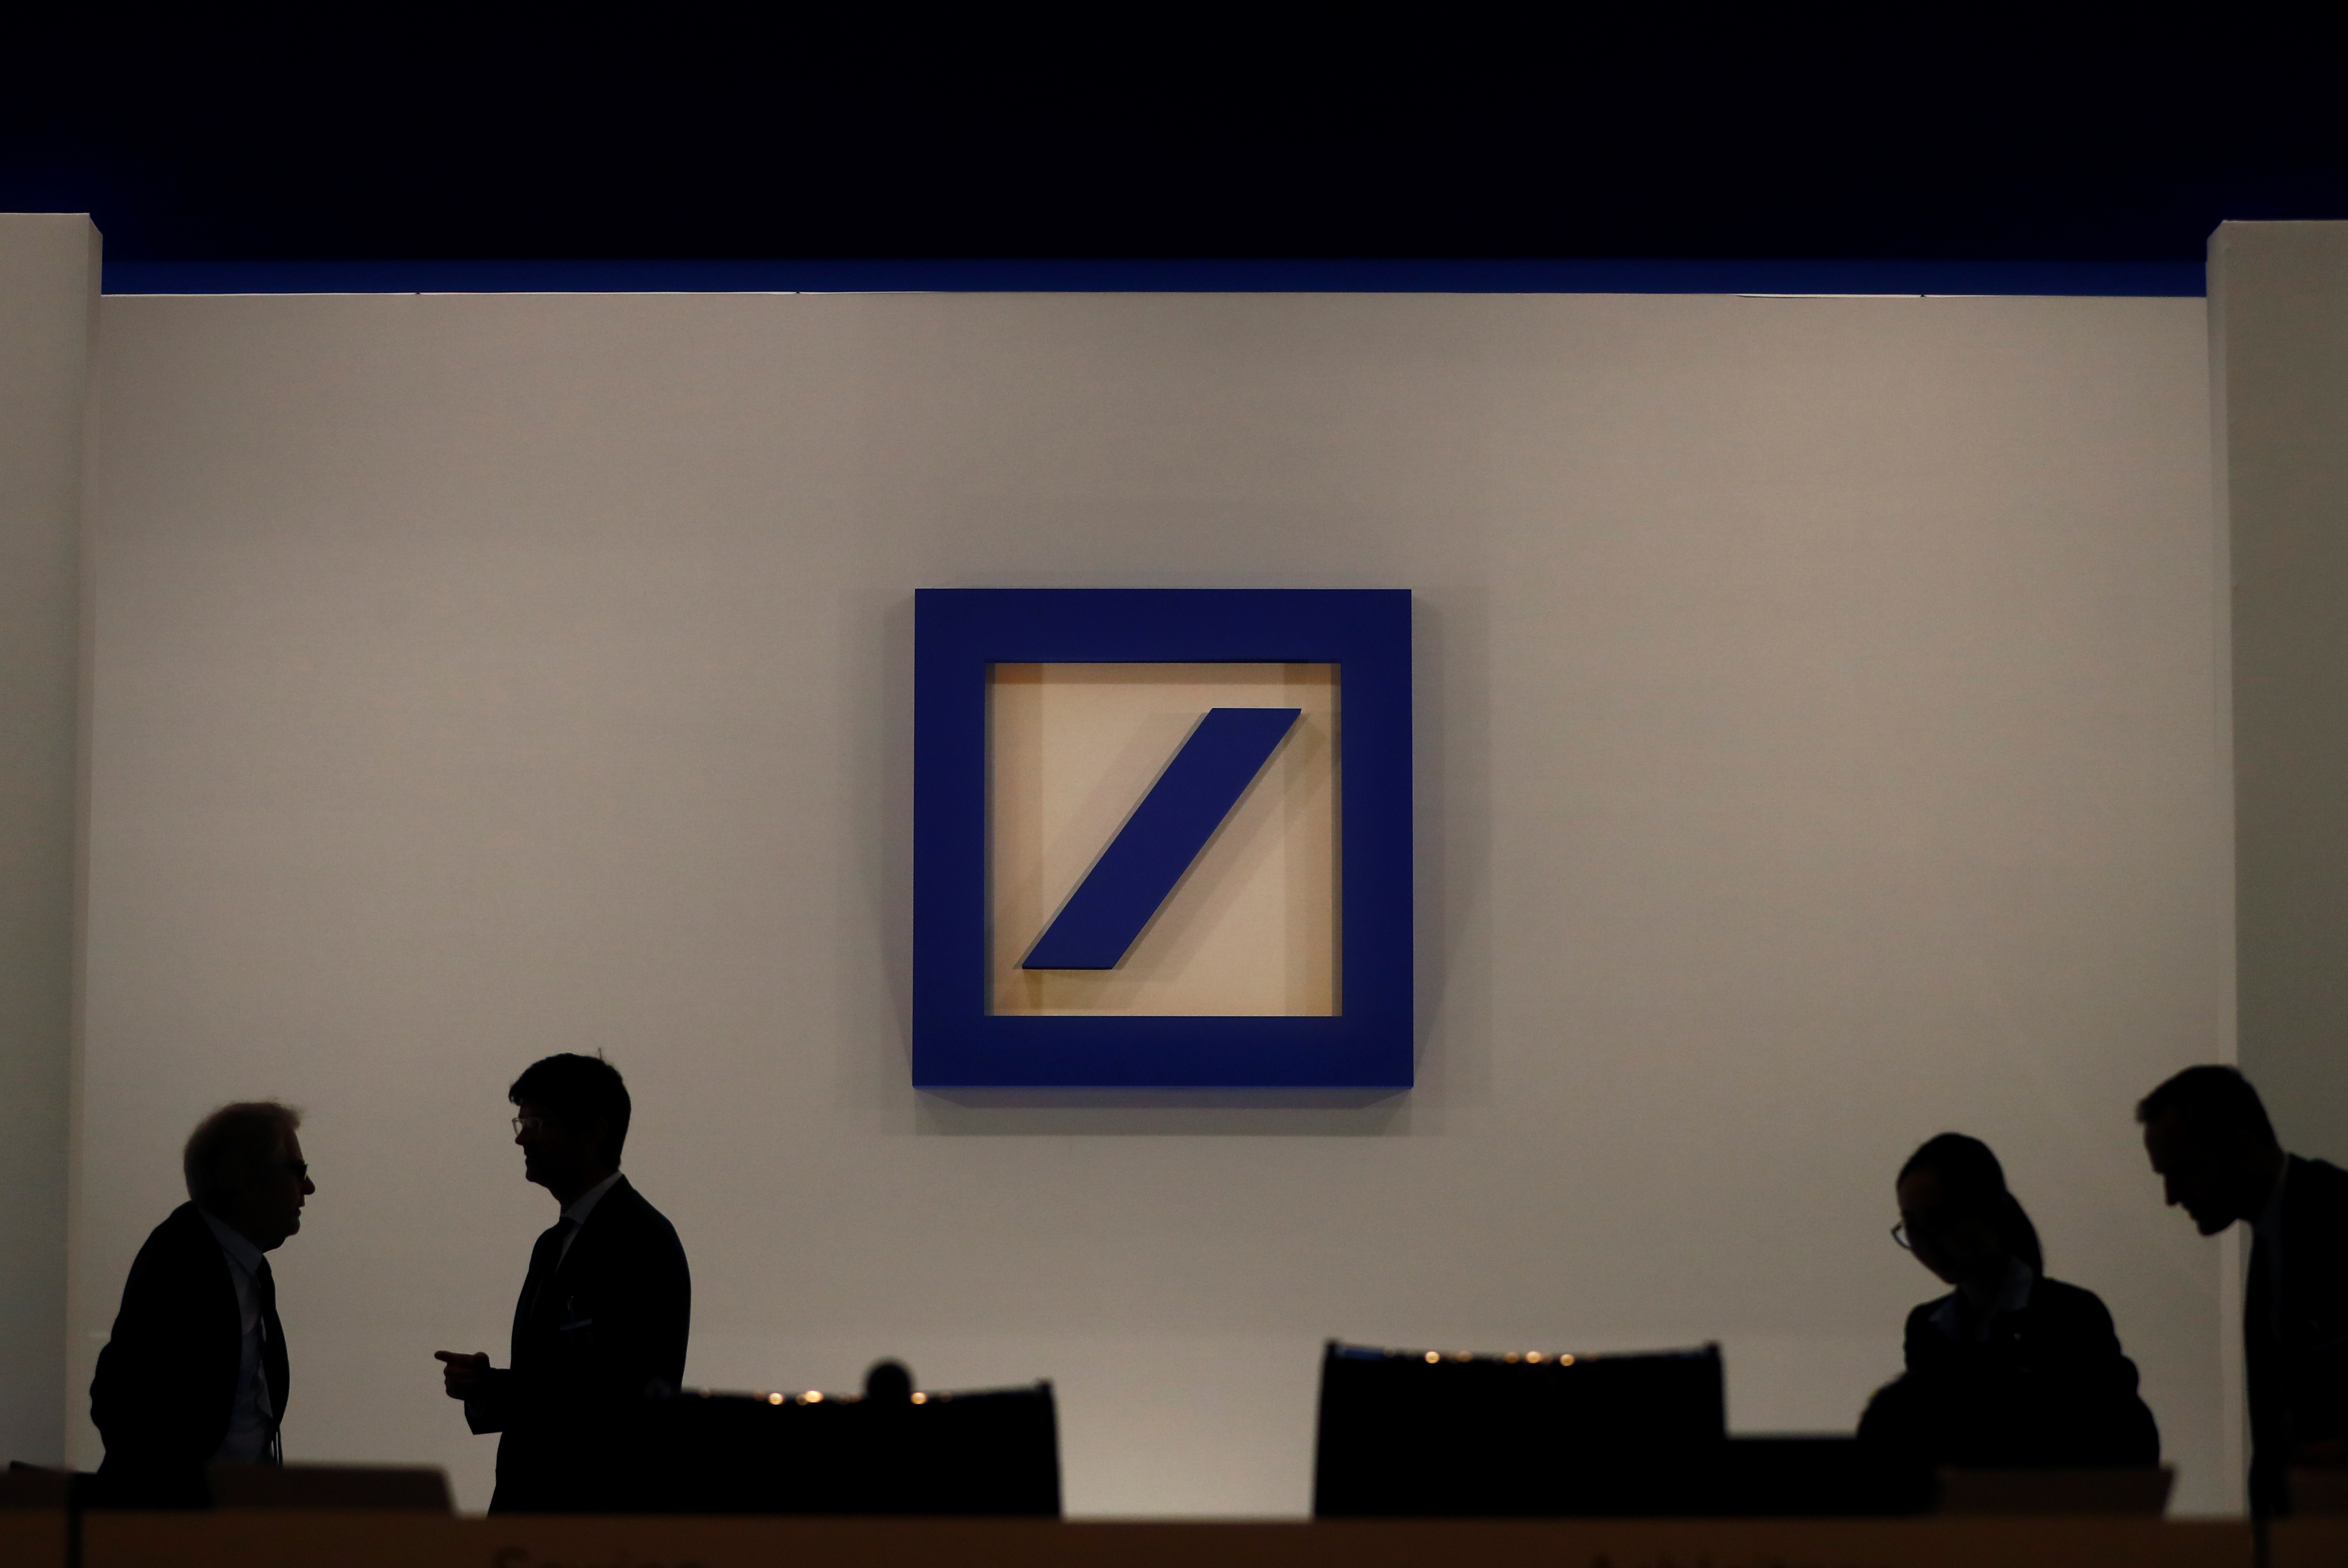 People are silhouetted next to the Deutsche Bank's logo prior to the bank's annual meeting in Frankfurt, Germany, May 24, 2018. REUTERS/Kai Pfaffenbach